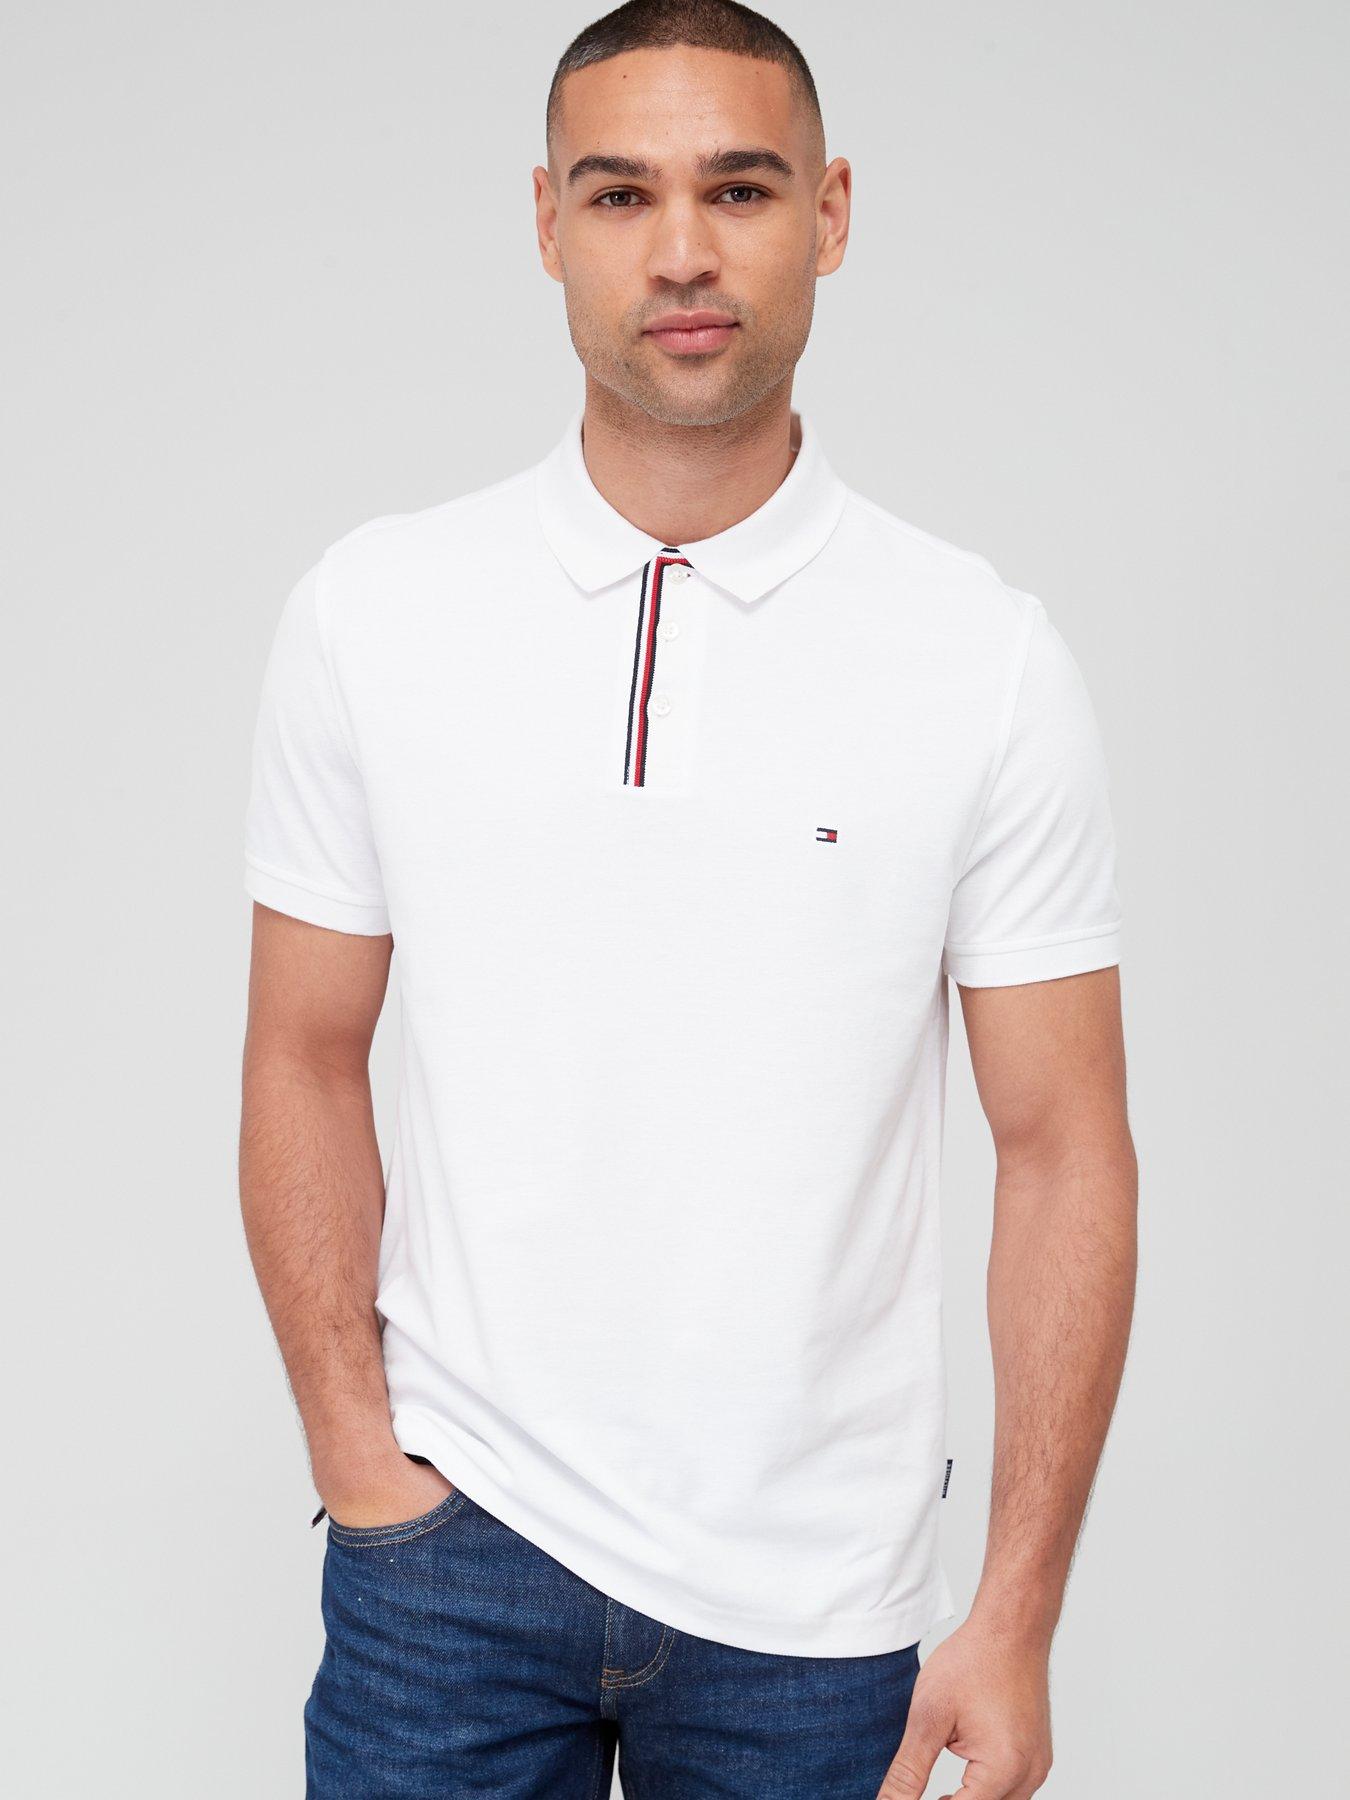 | Sleeve | polos T-shirts Main Deals & Black Friday | Short Men | hilfiger Collection All Tommy |